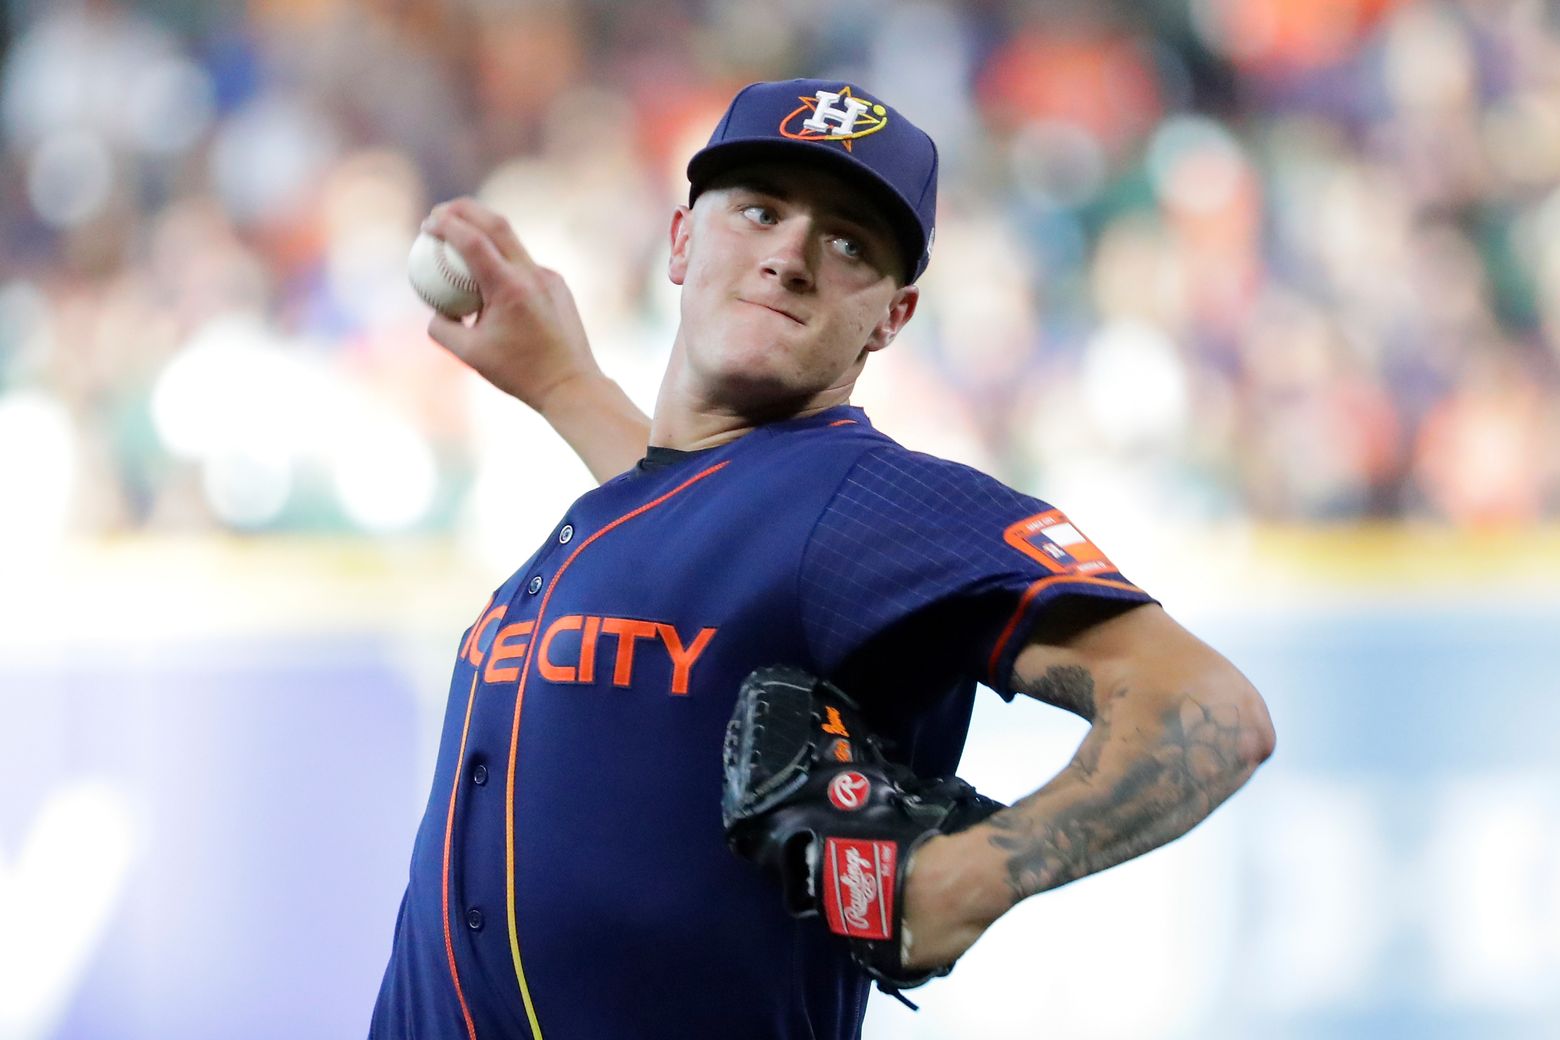 Houston Astros: Hunter Brown's work yields results in sharp outing